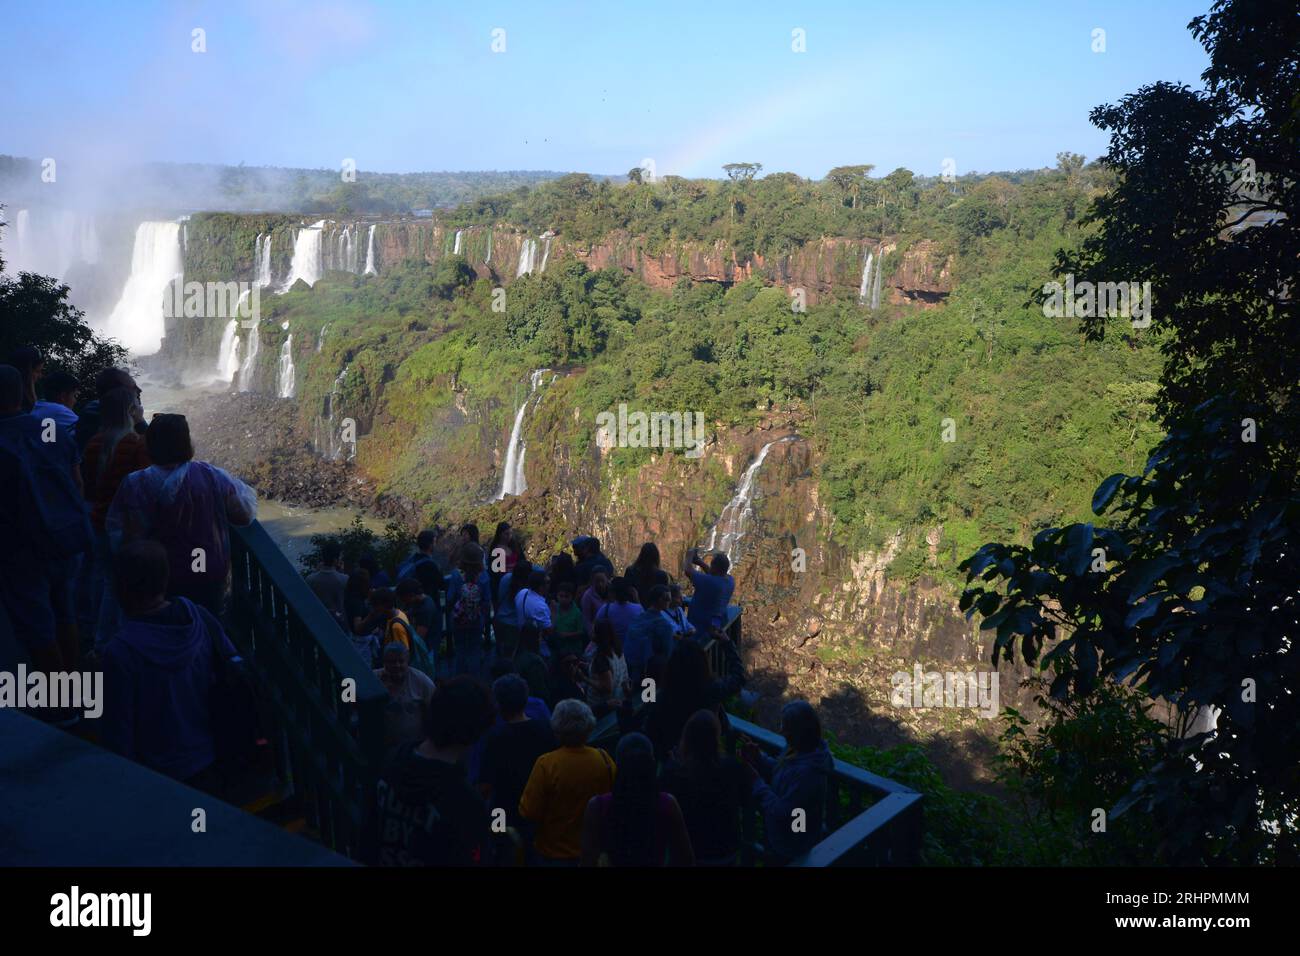 Tourists at Iguazu Falls, one of the great natural wonders of the world, on the border of Brazil and Argentina. Stock Photo